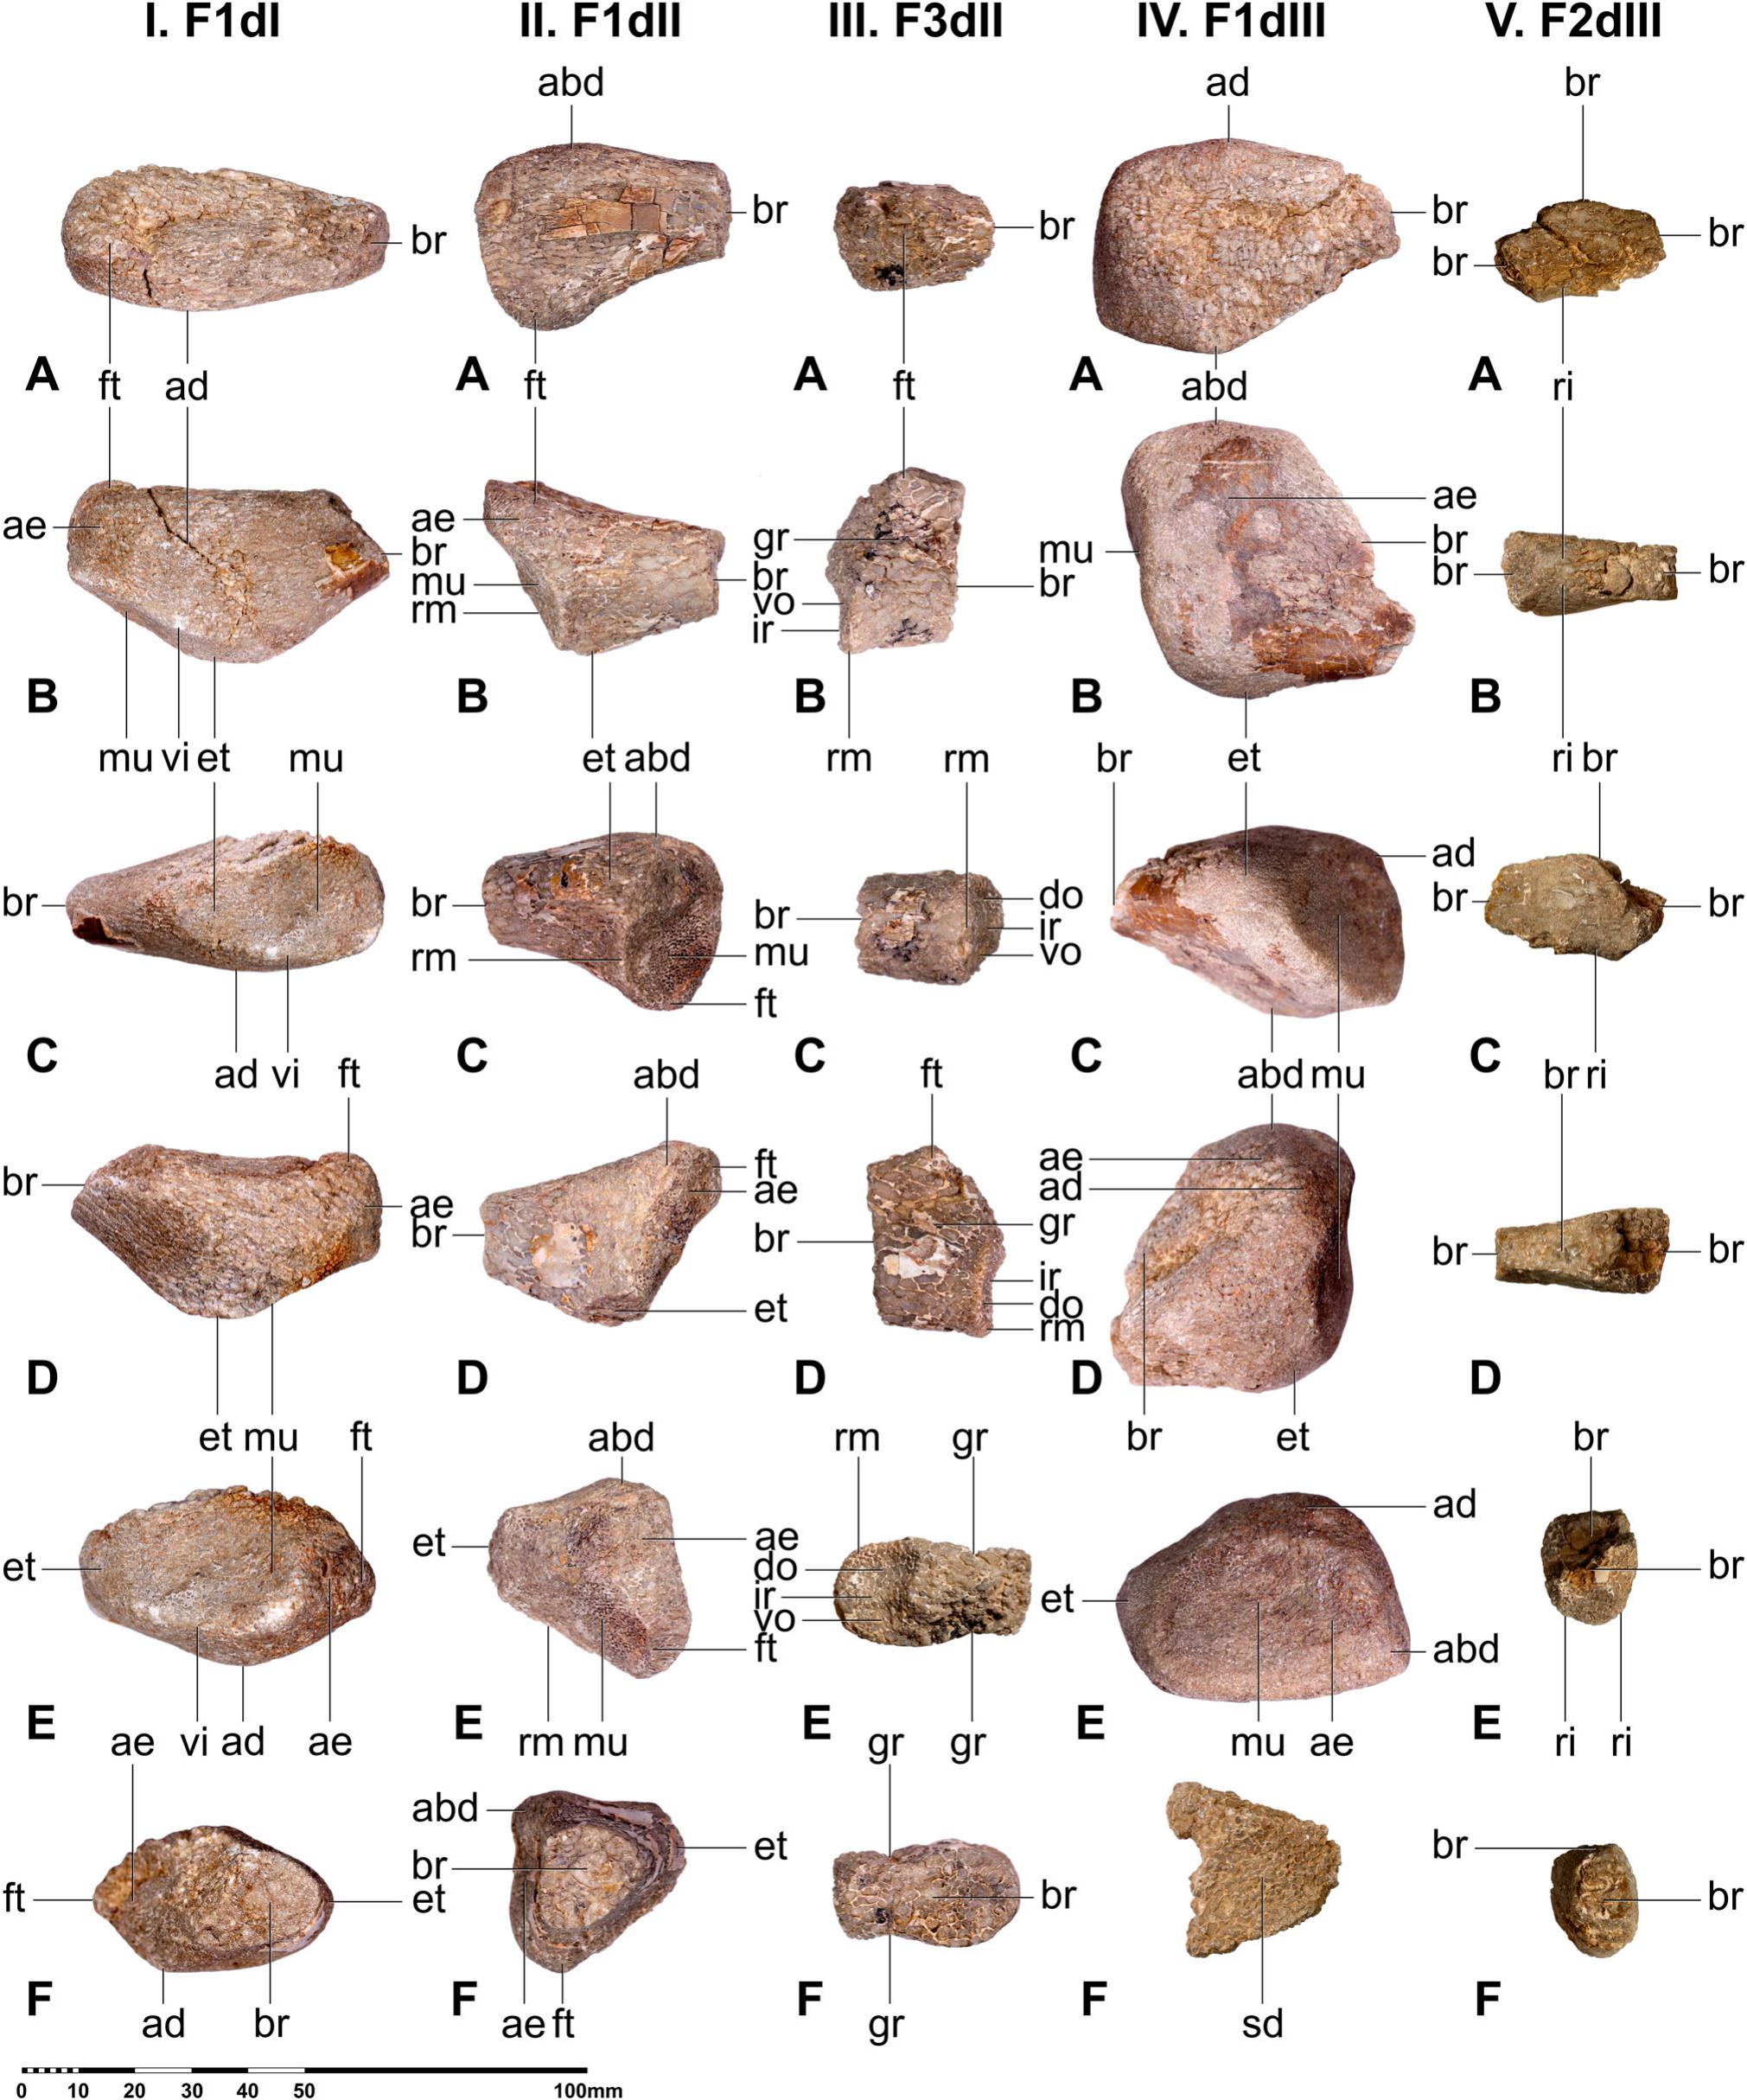 Full article: Morphology and taxonomy of Quetzalcoatlus Lawson